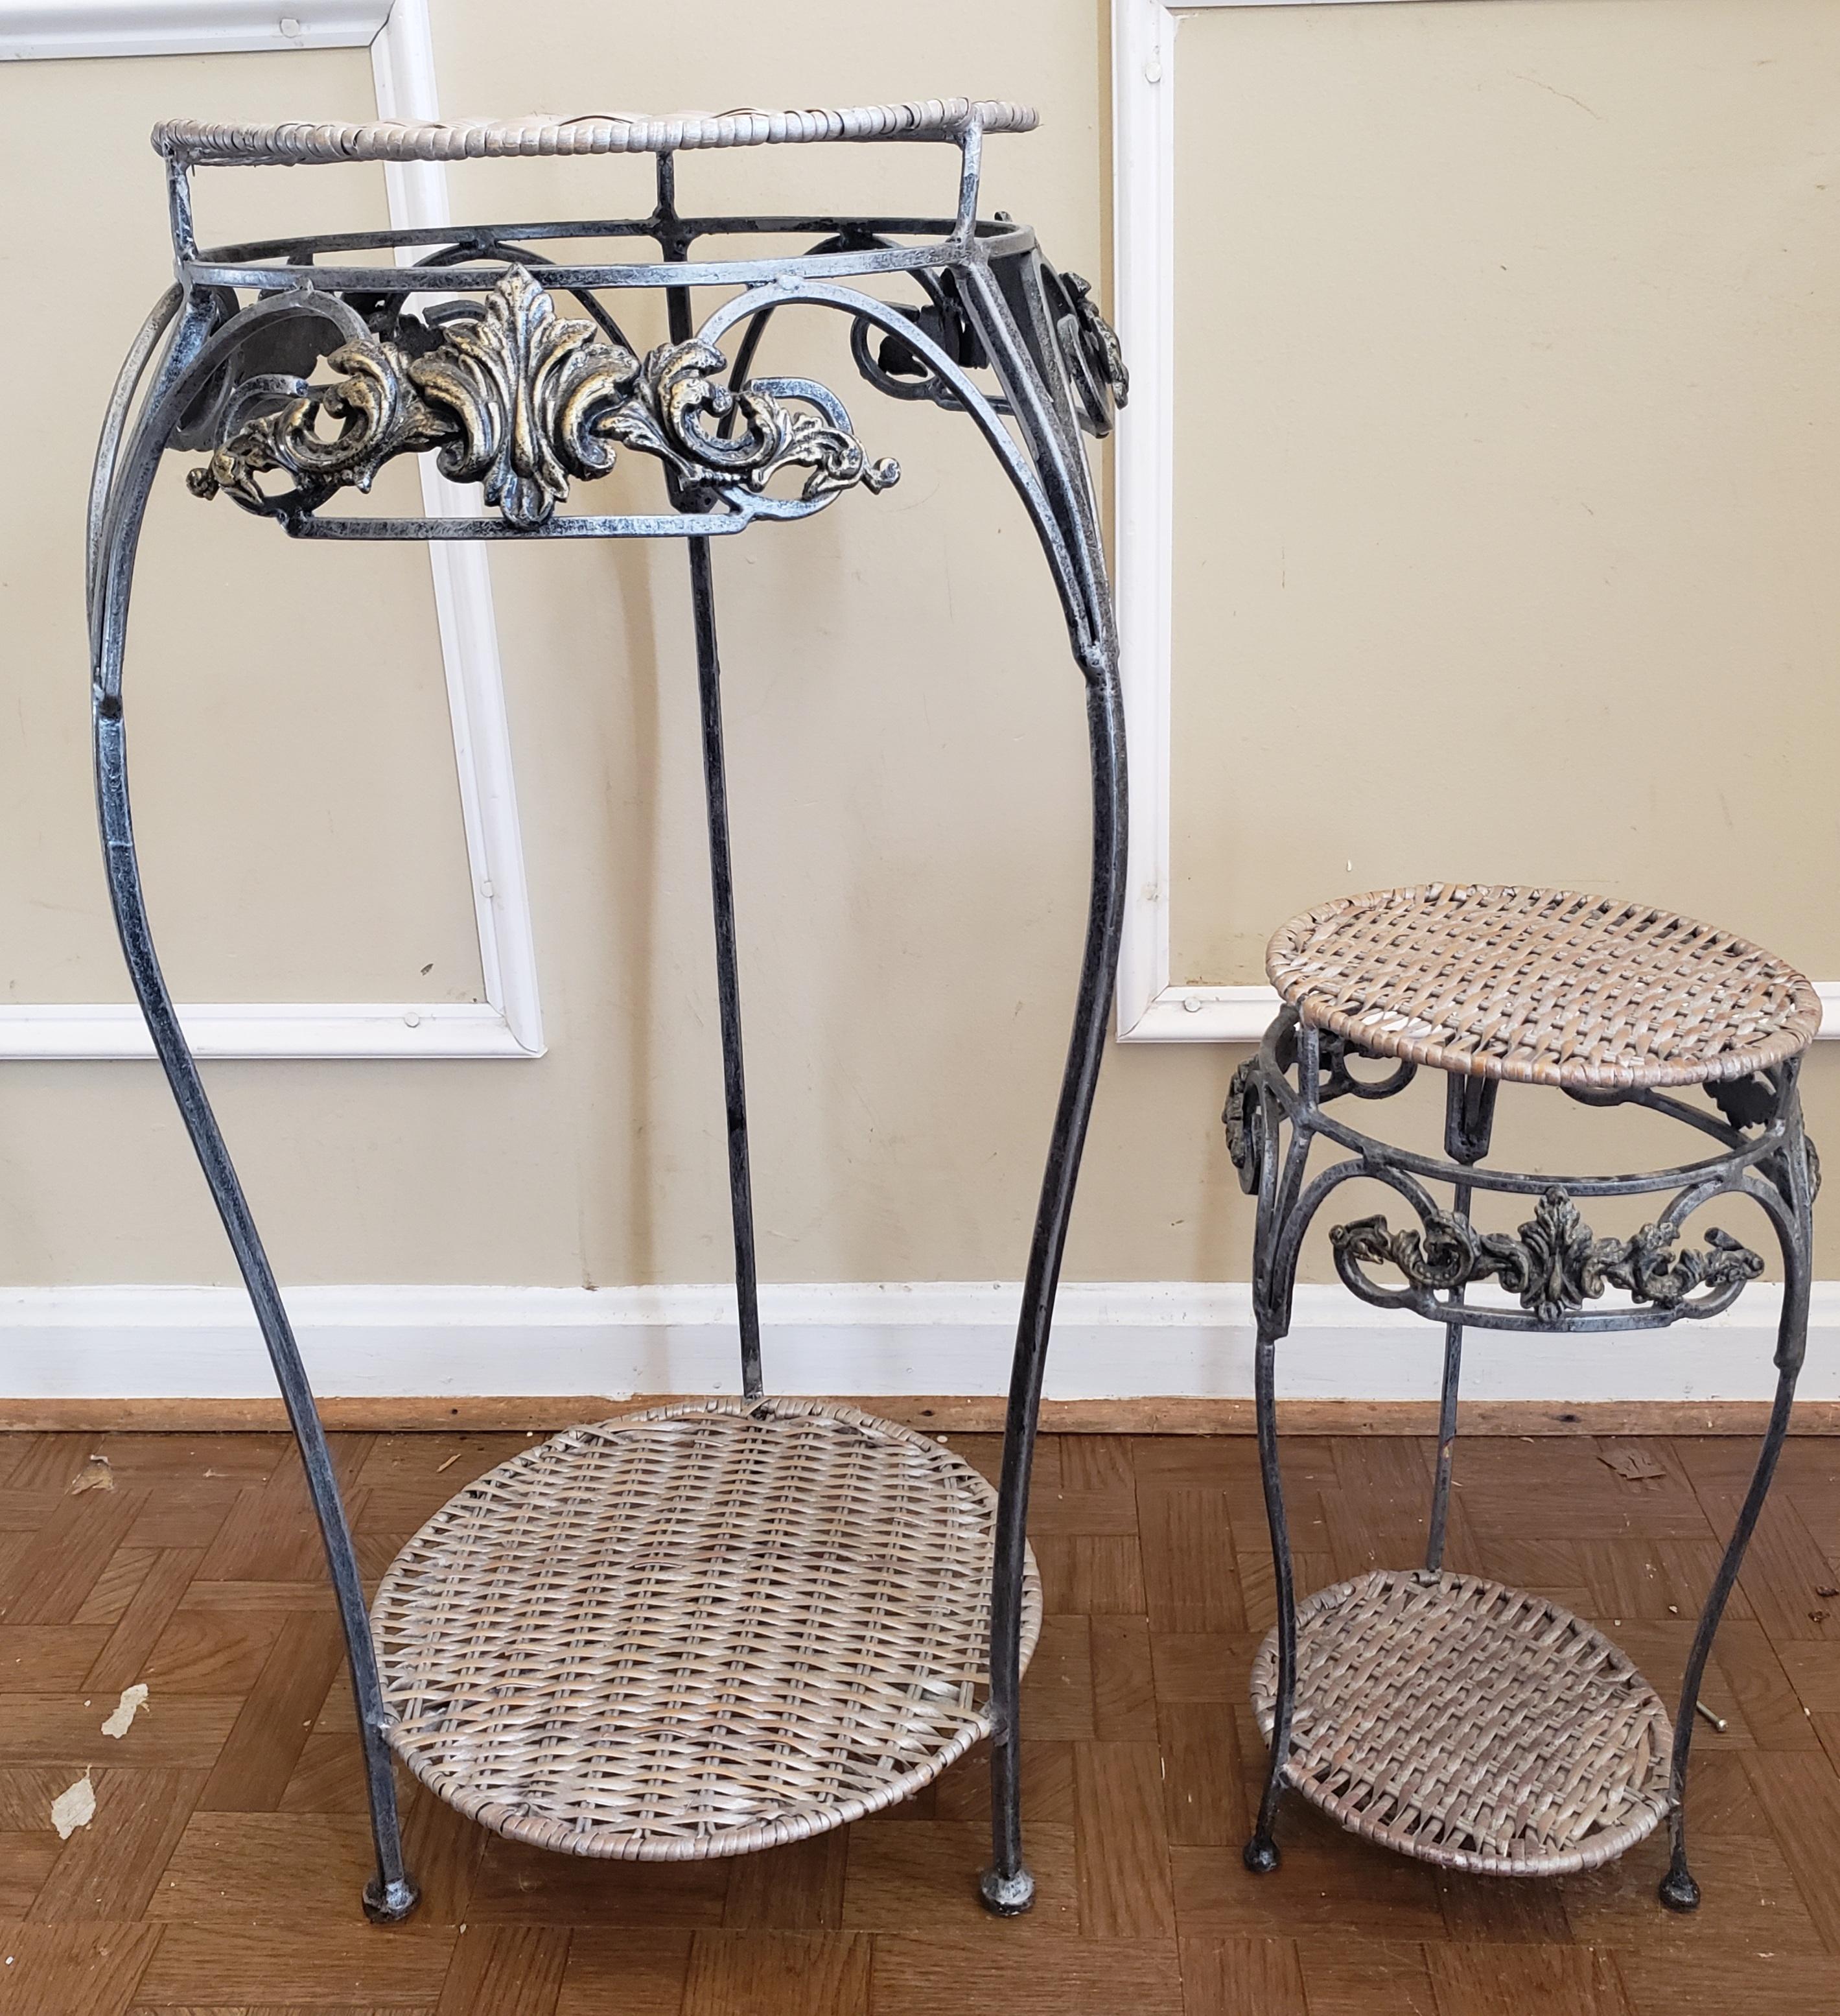 Pair of Ornate iron and wicker stands in excellent condition. 
Larger table measures 14